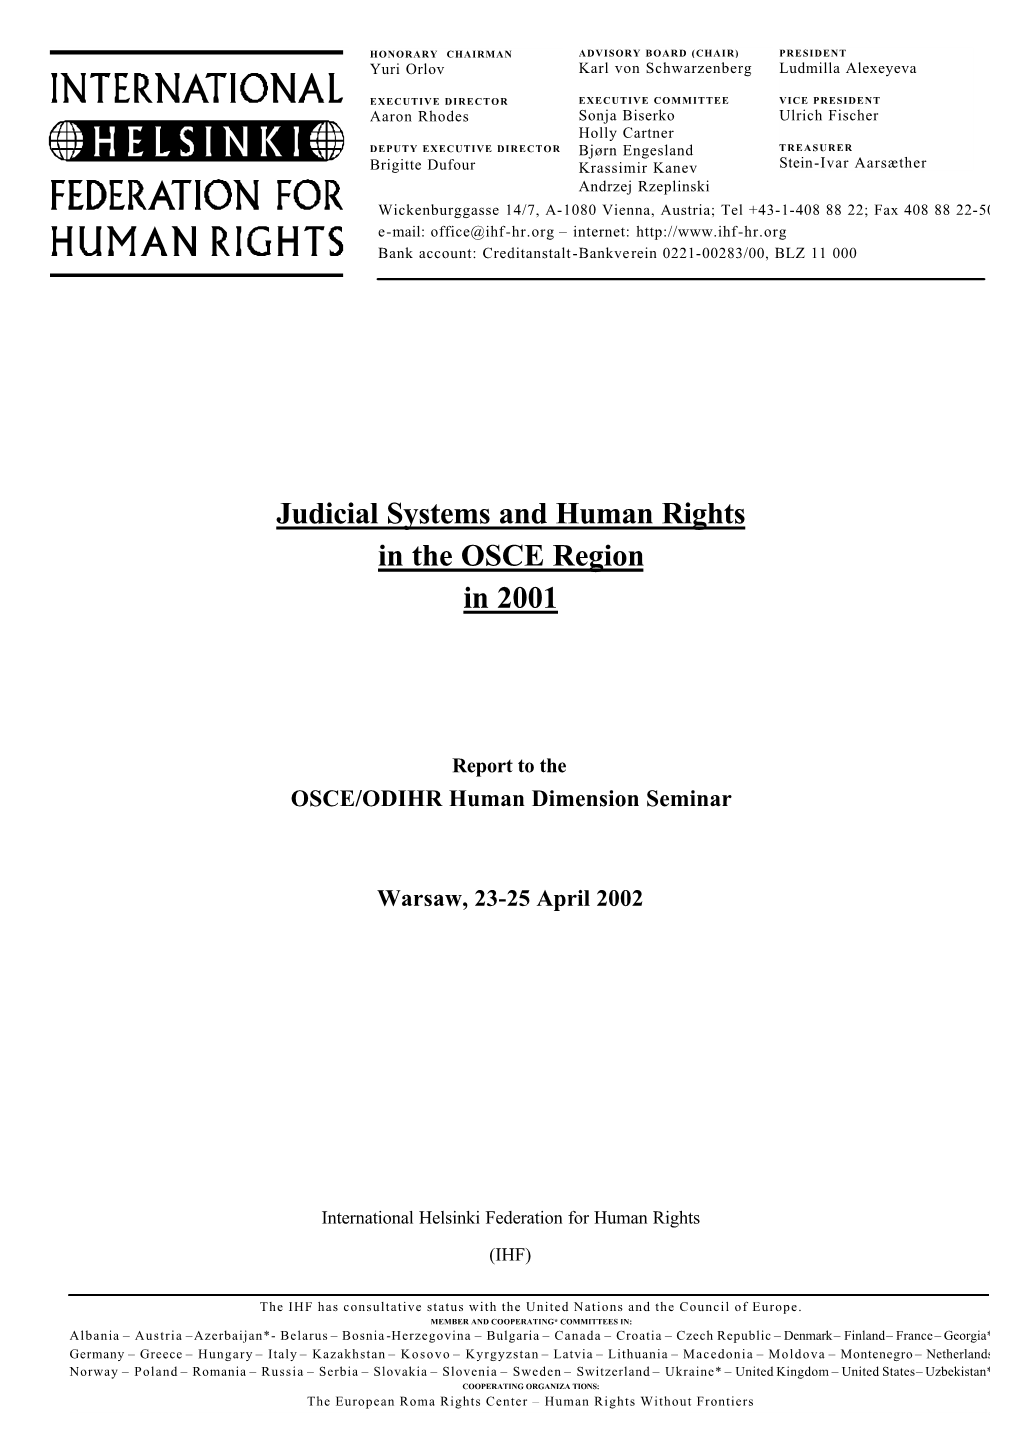 Judicial Systems and Human Rights in the OSCE Region in 2001